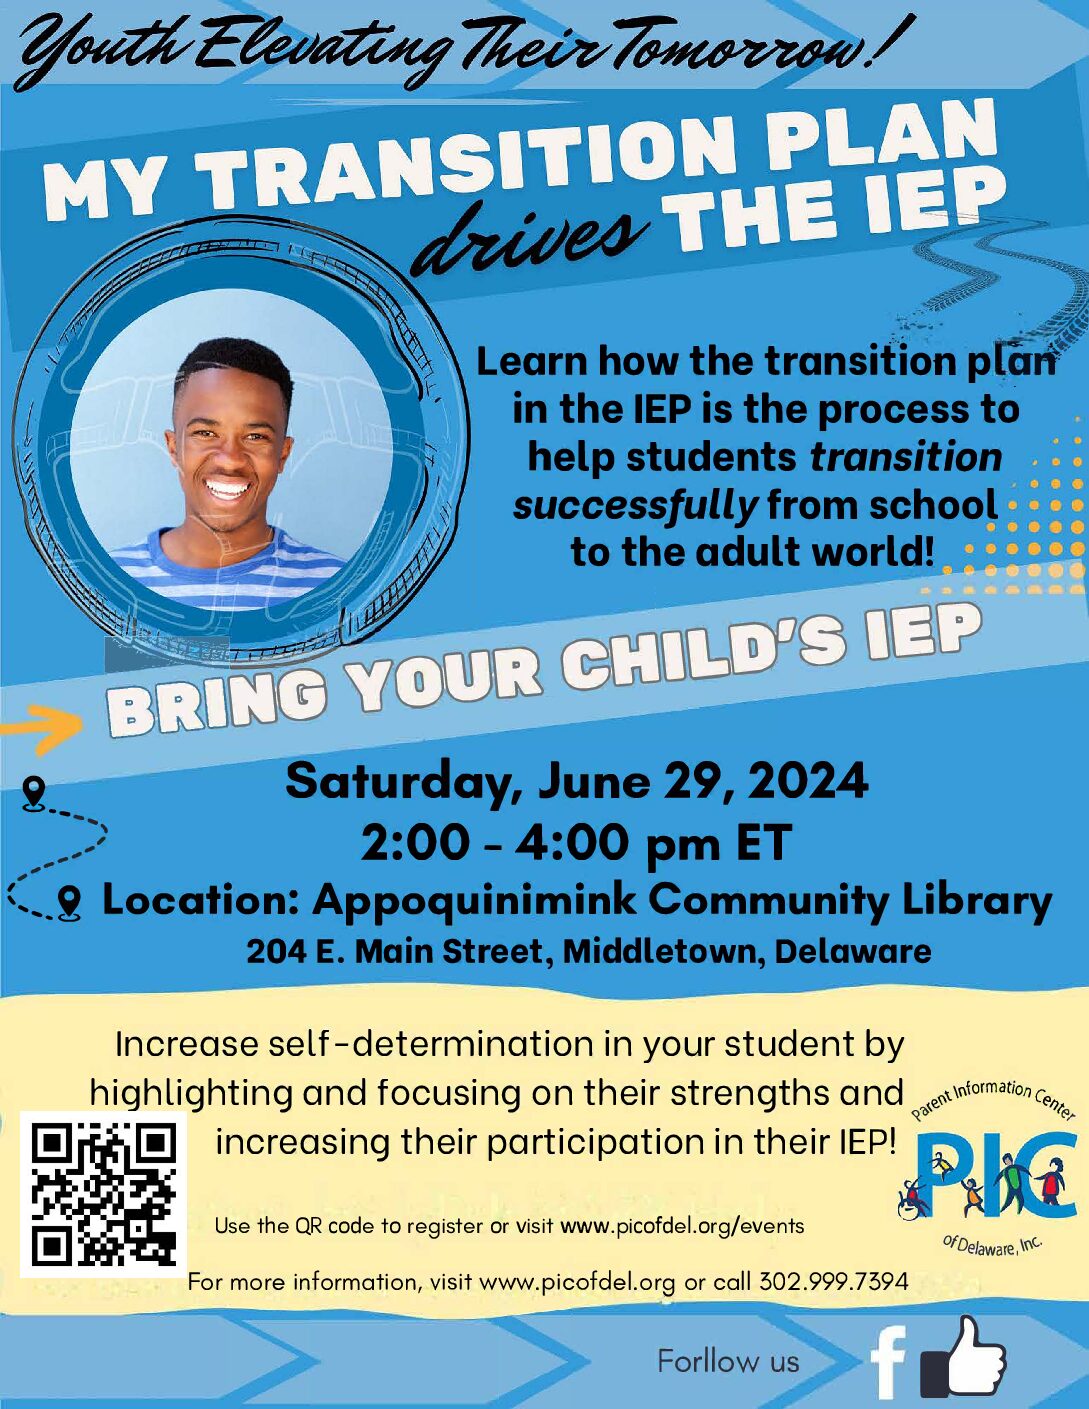 My Transition Drives the IEP